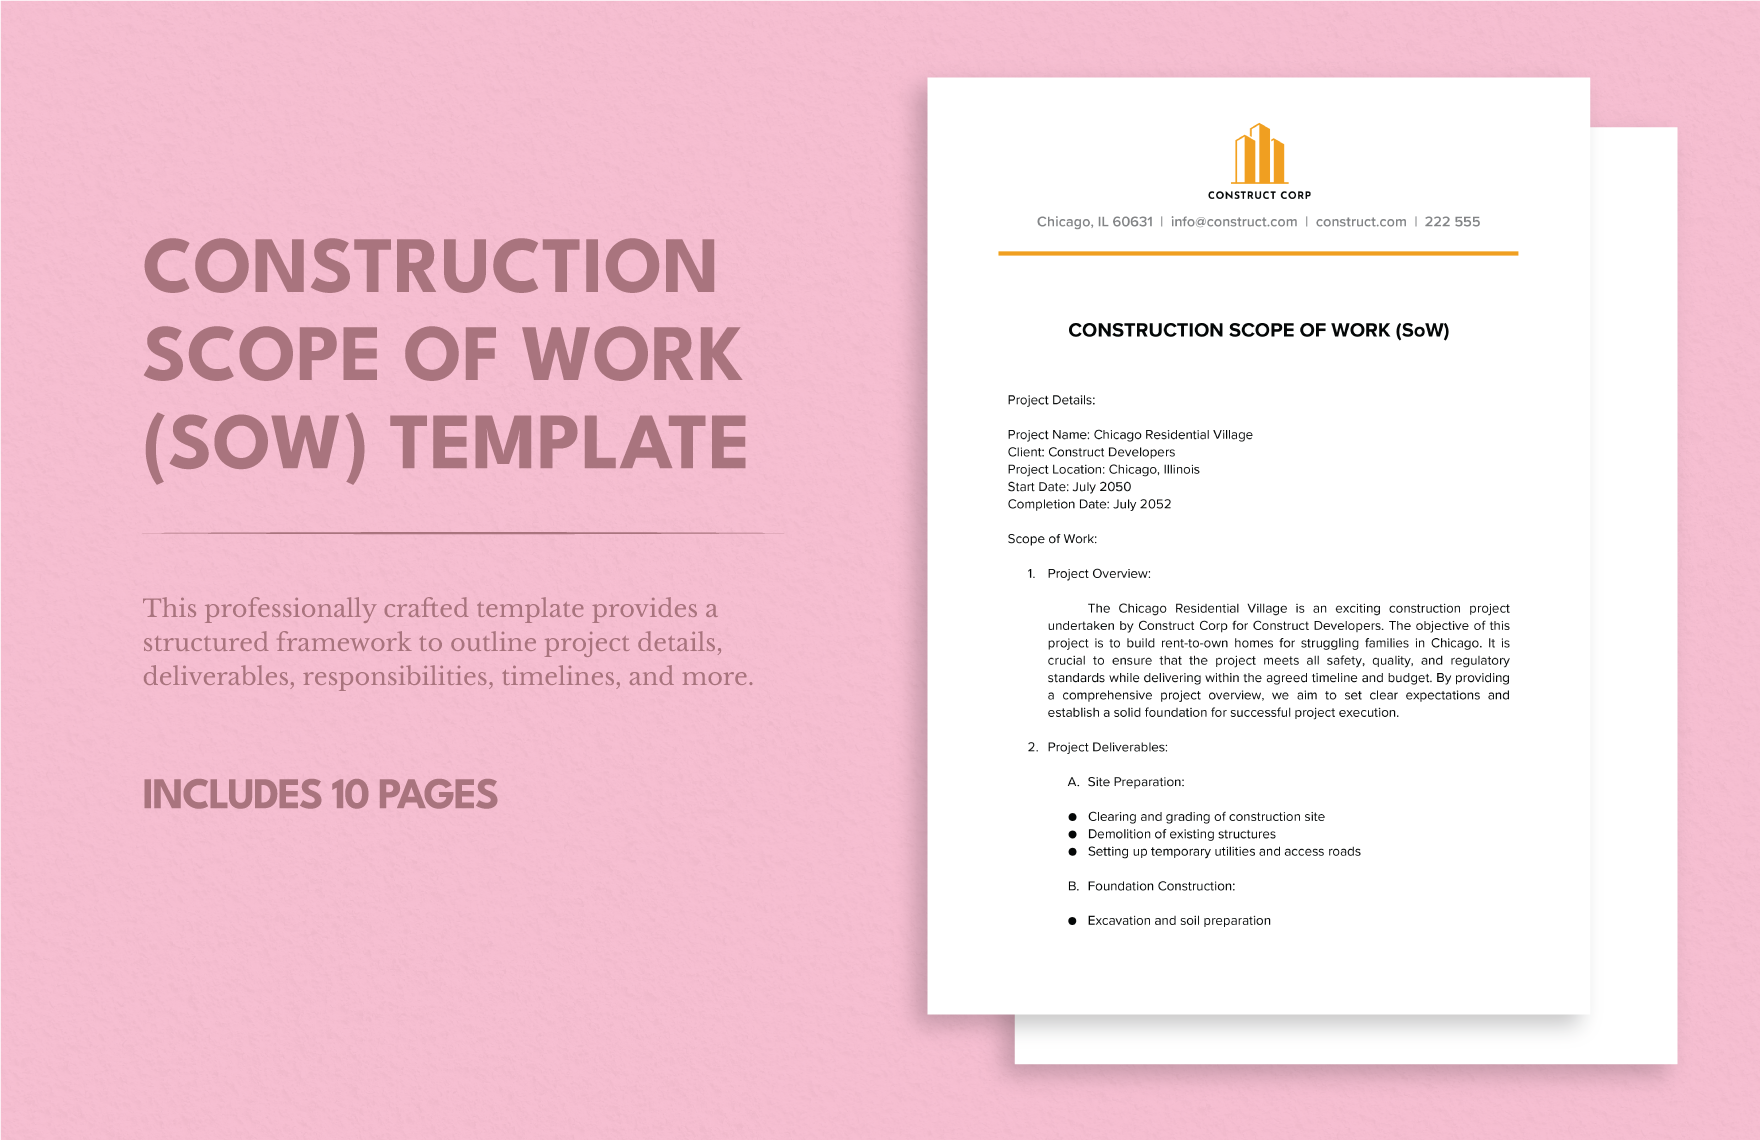 Construction Scope of Work (SoW) Template